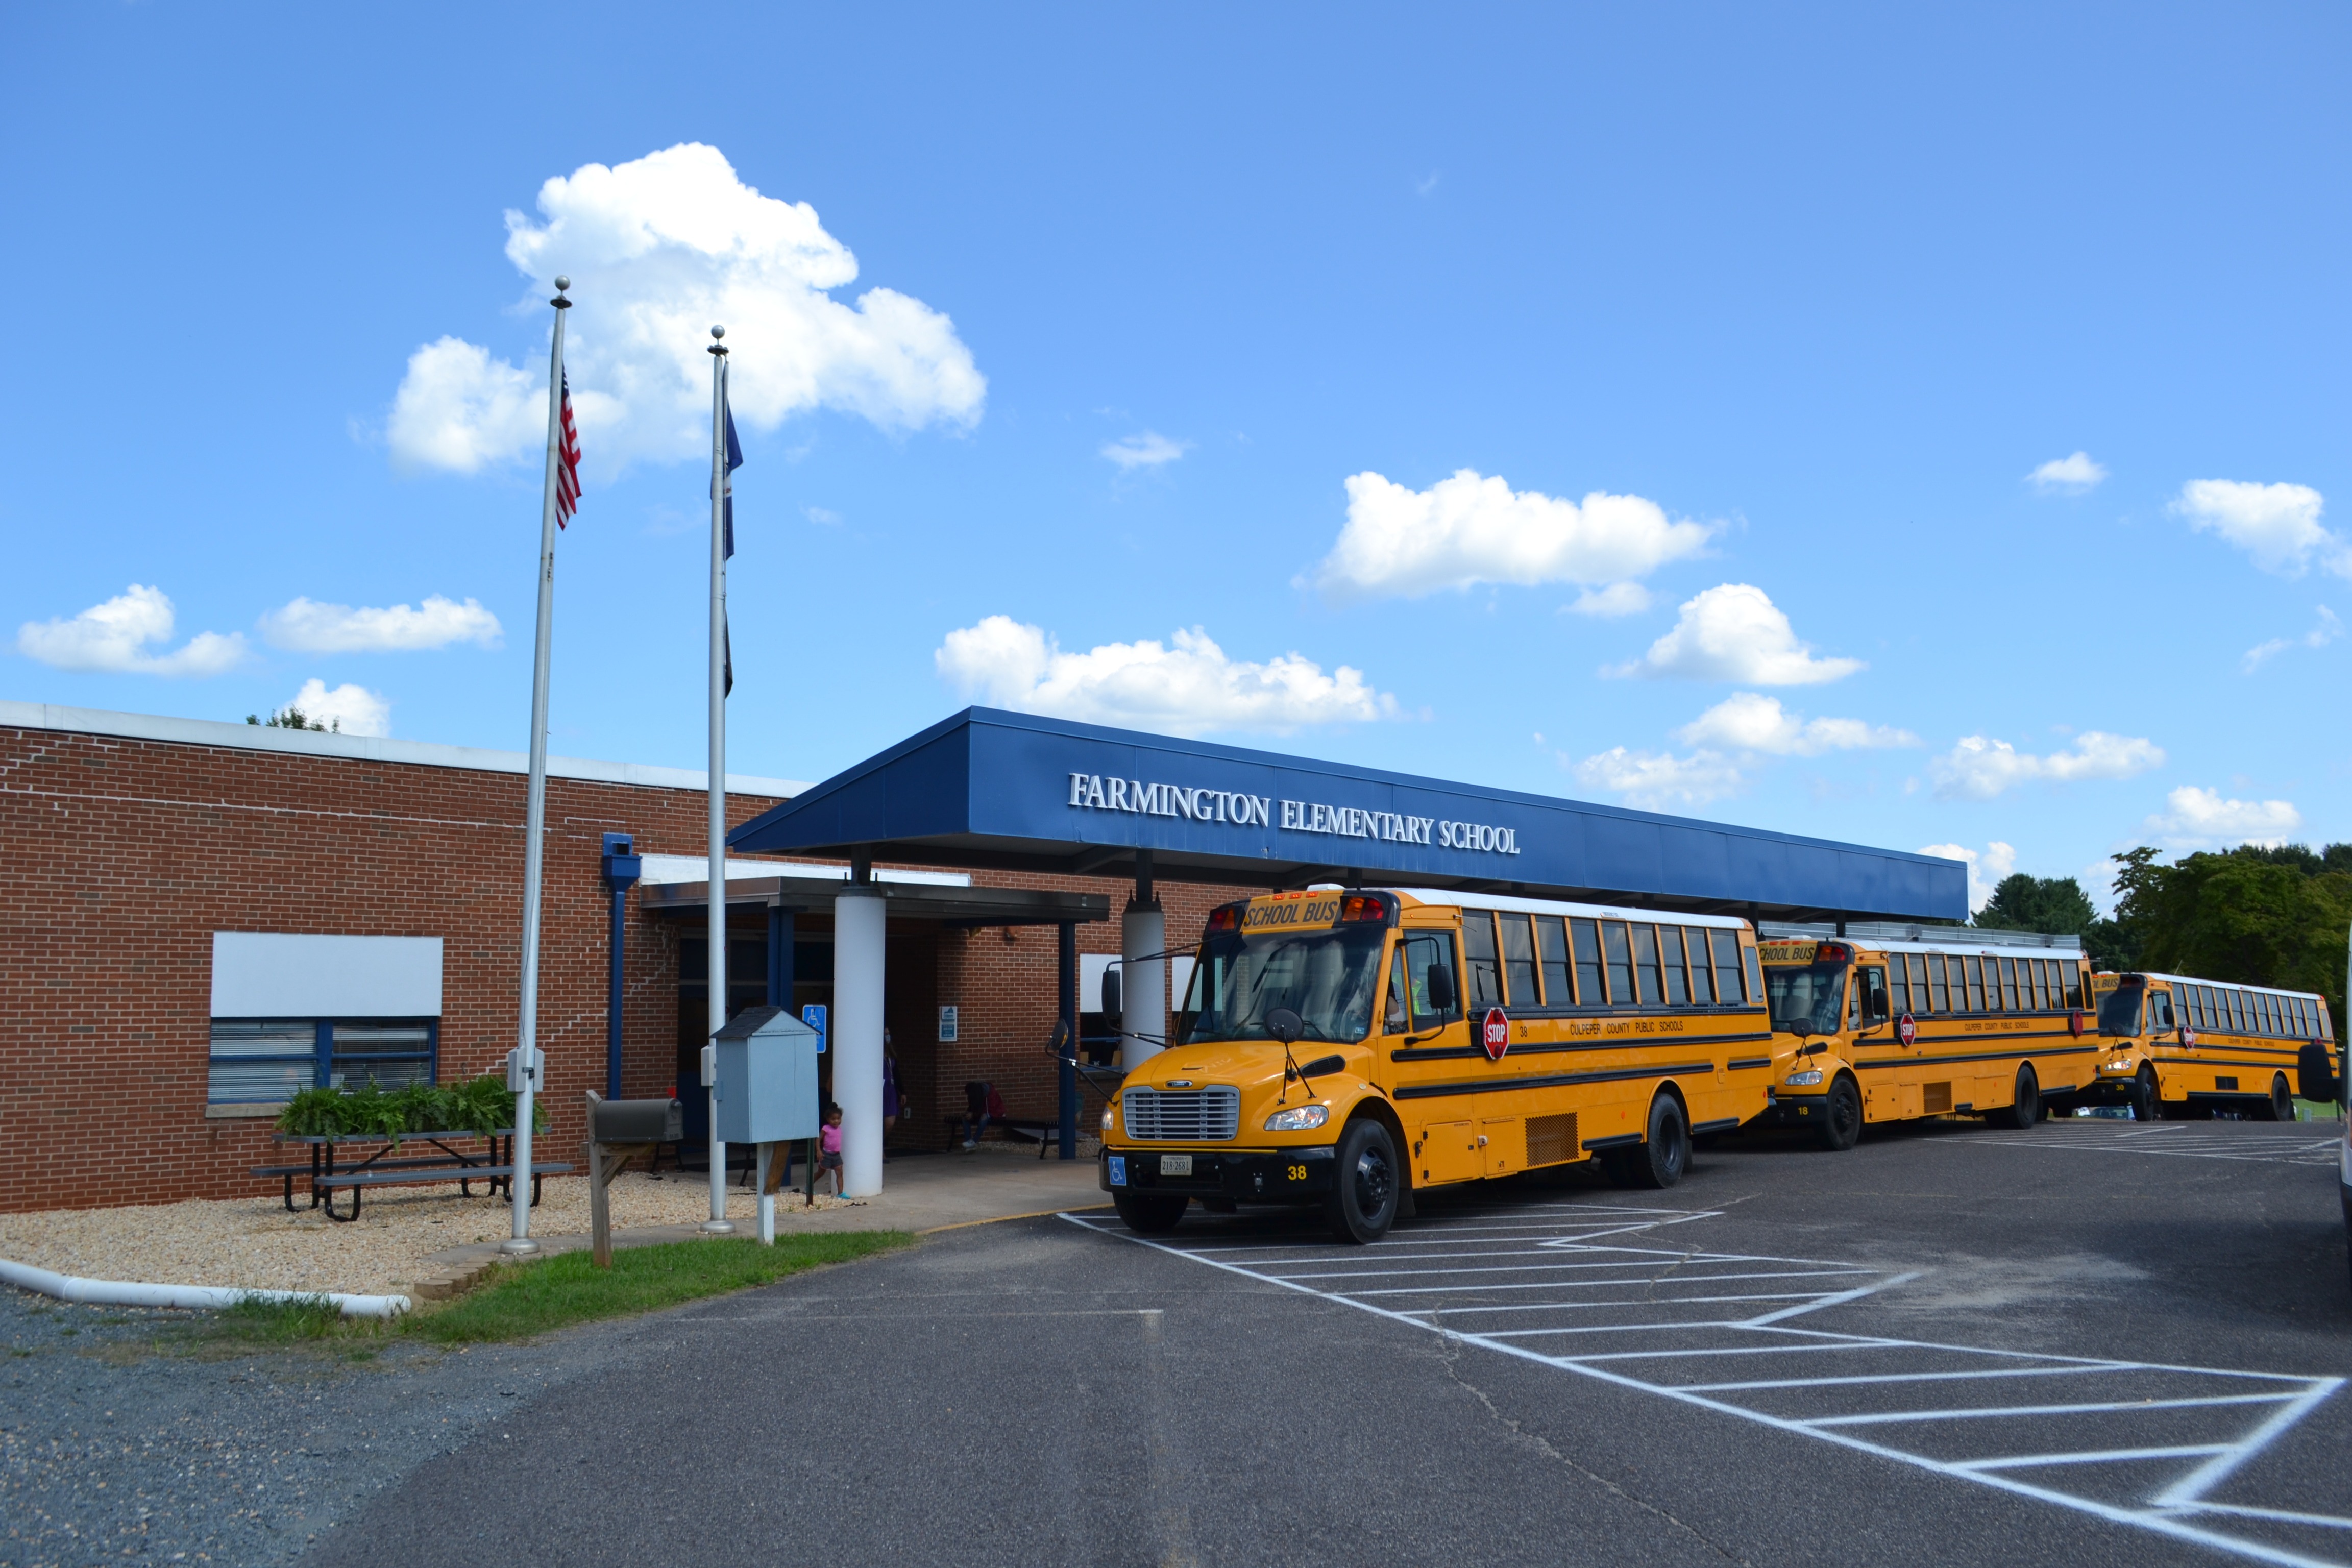 Three school buses sit in front of Farmington Elementary